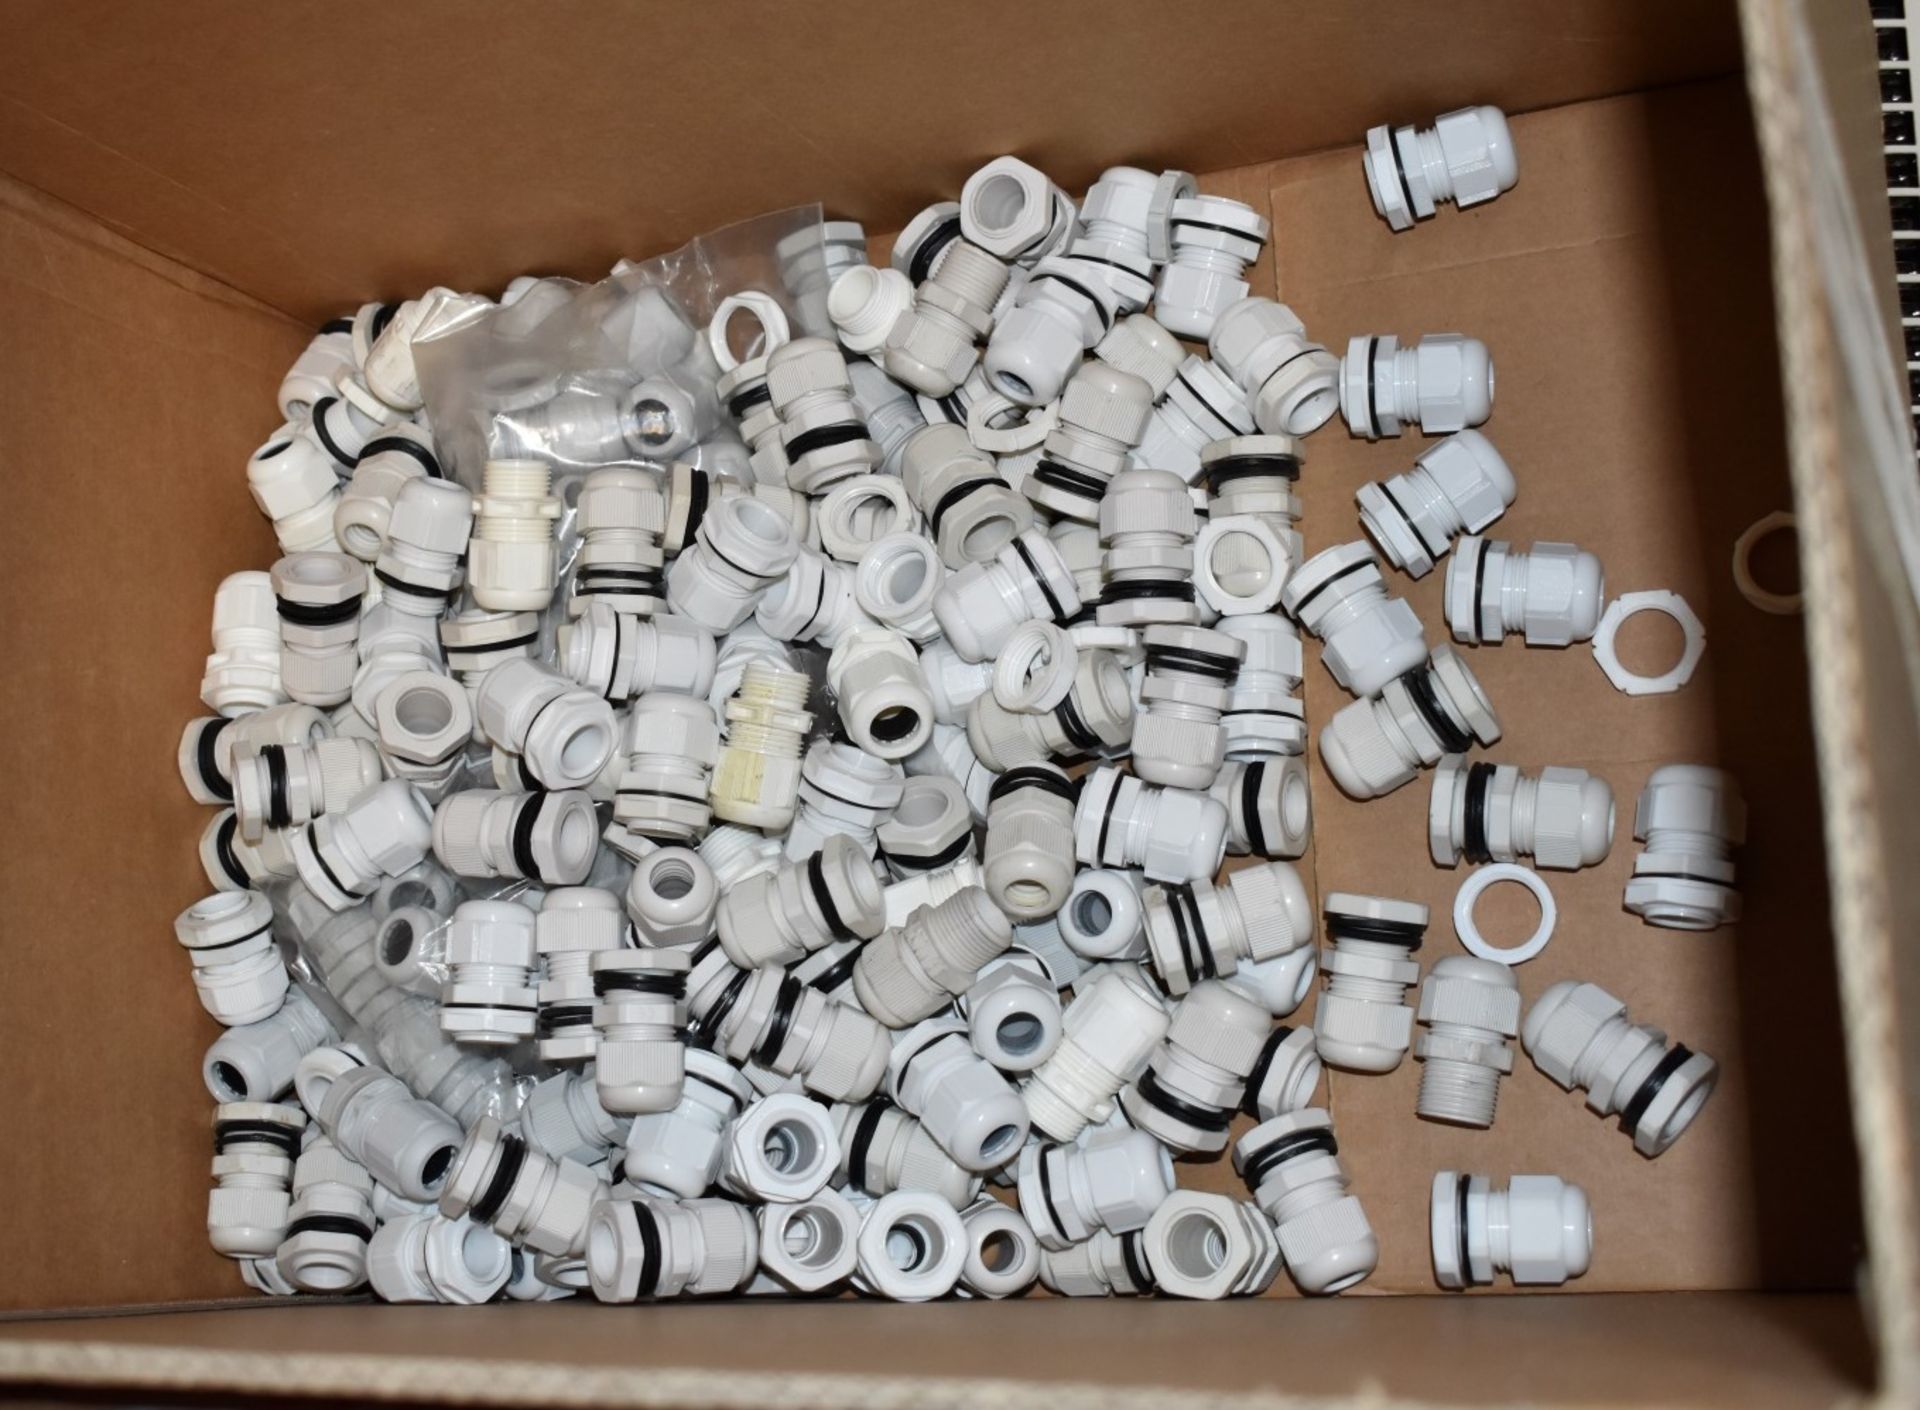 1 x Assorted Job Lot - Cable Glands, Light Suspension Kits, Saddles, Ceiling Roses, Cables, Sockets - Image 4 of 27